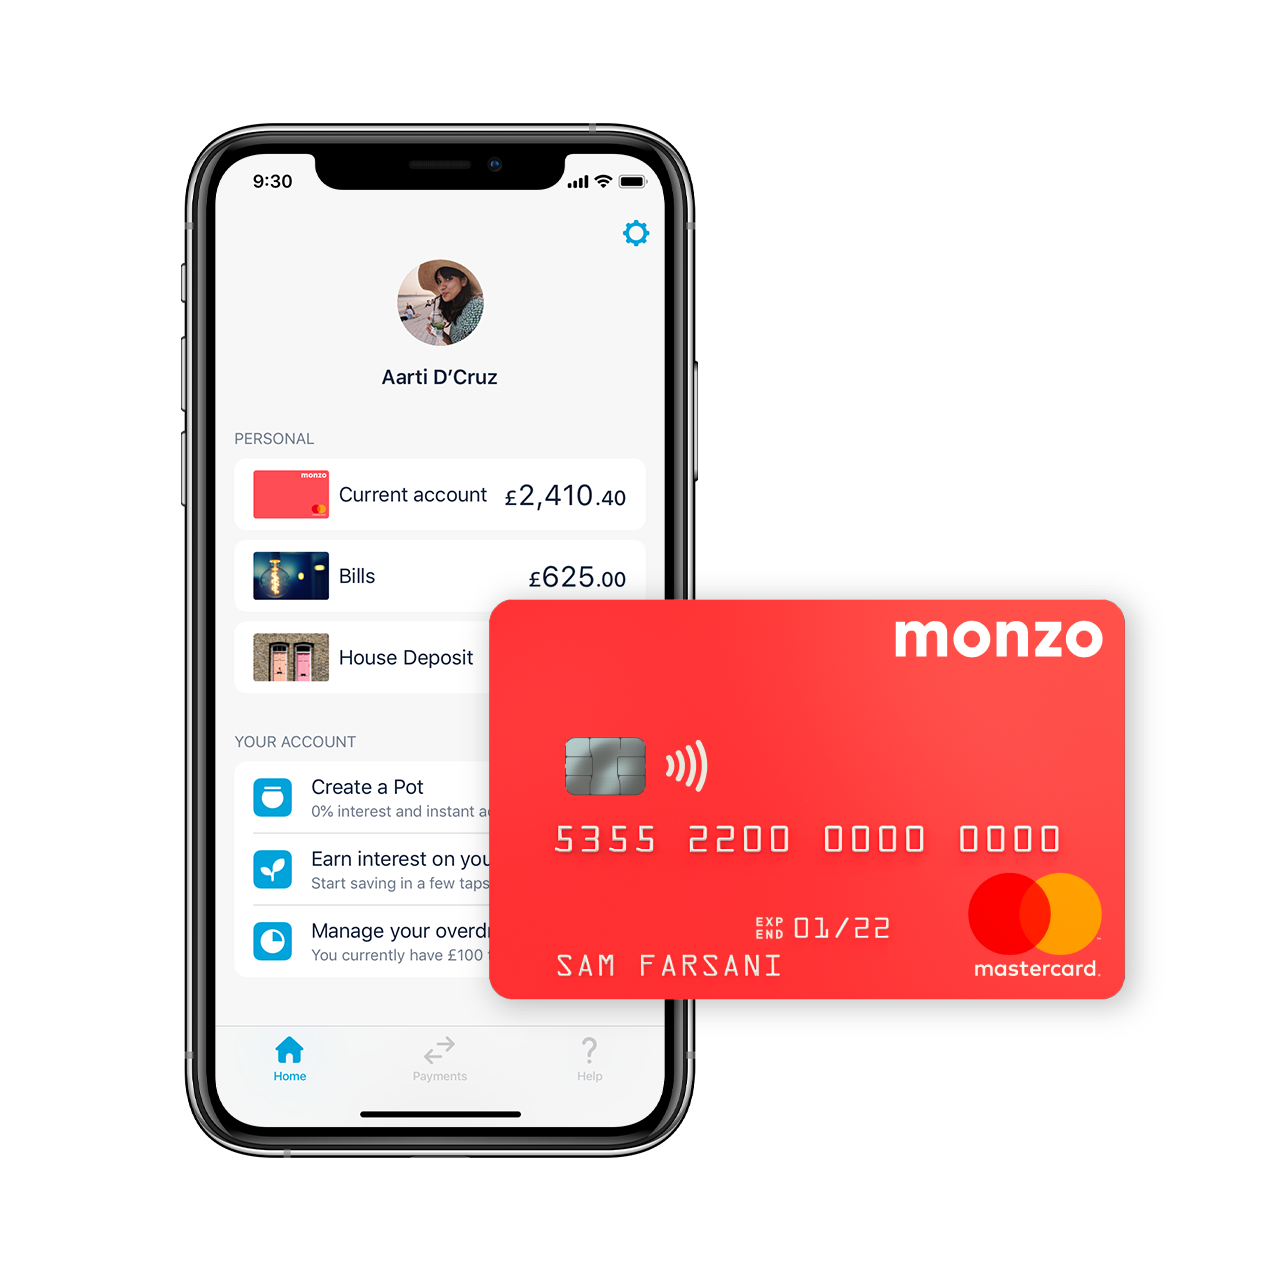 how to find cvv number on monzo app